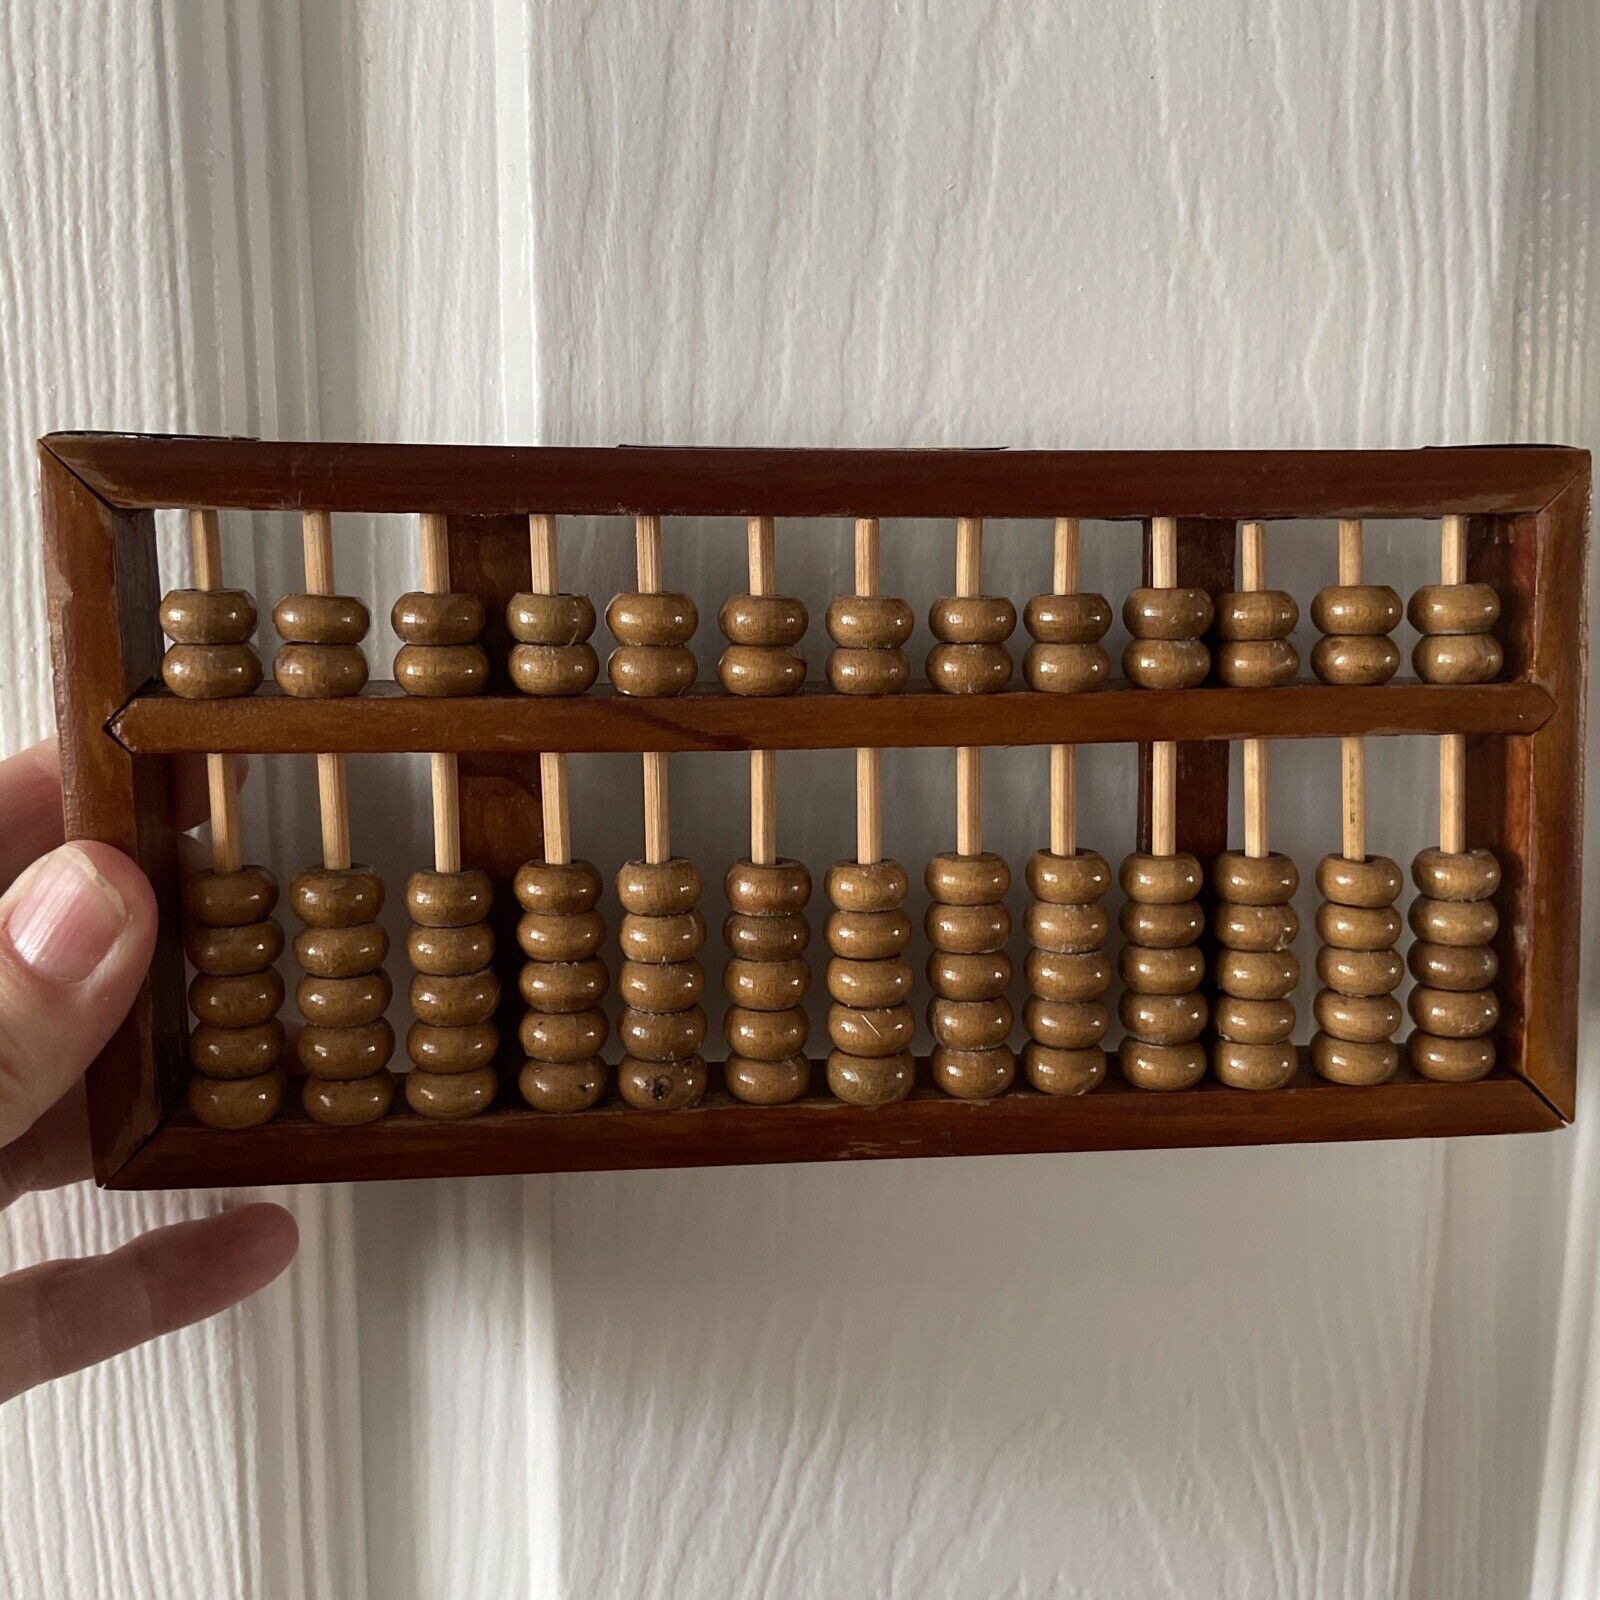 Vintage Chinese Abacus Wood Frame & Beads w/ Brass Hardware 13 Rows 7.5”